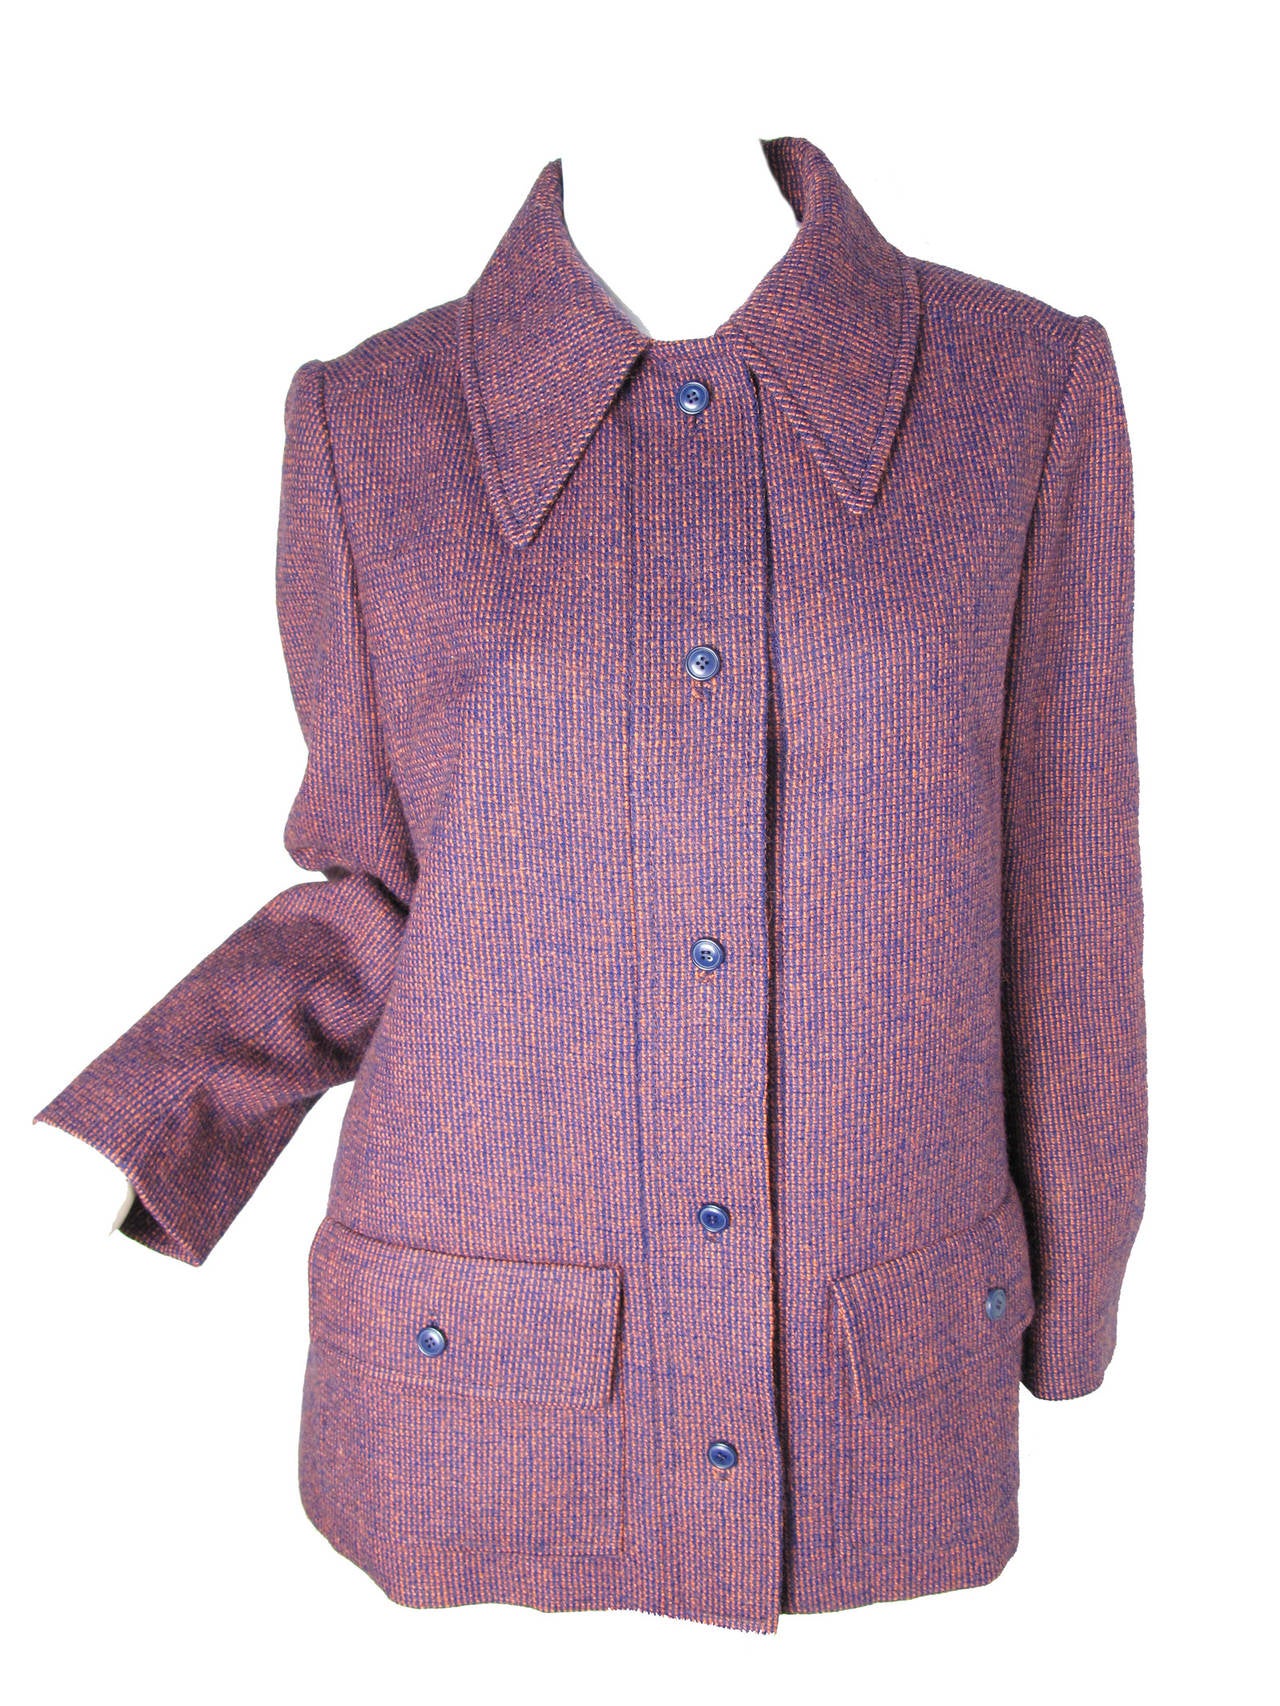 1960s CHRISTIAN DIOR Suit Numbered. Purple and pink woven wool jacket and skirt. Jacket: 40